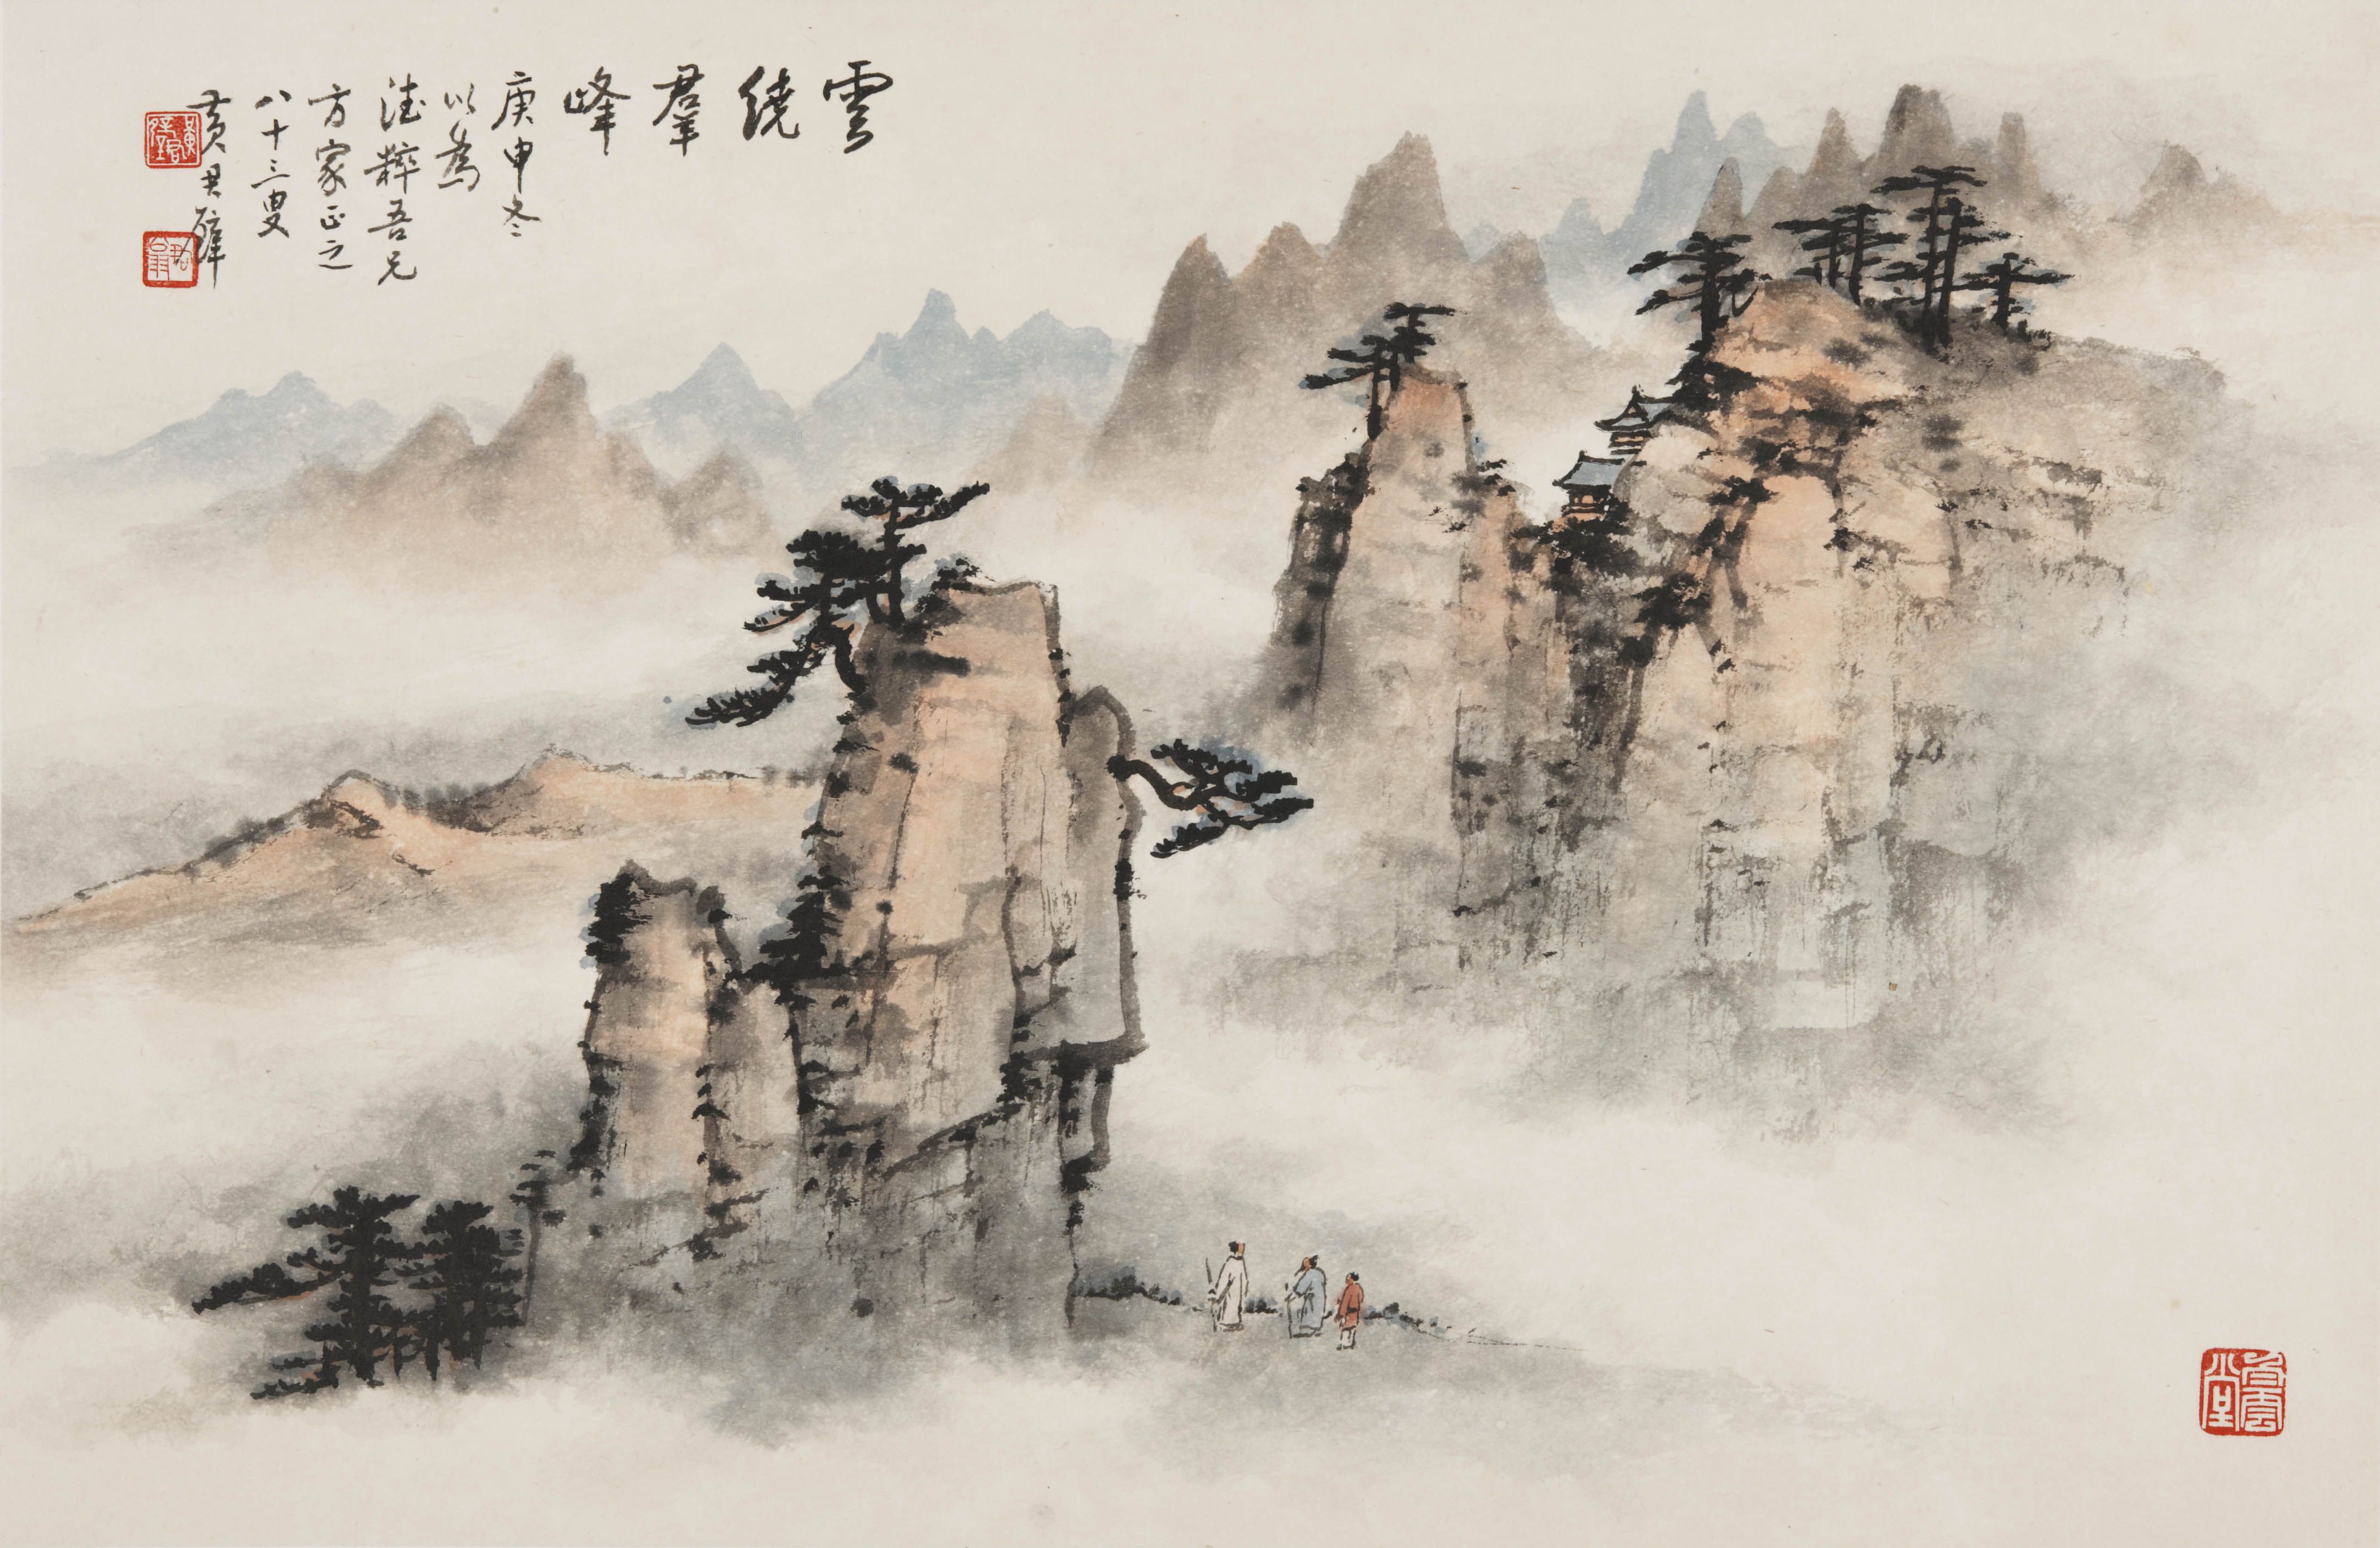 76 Asian Art Wallpapers HD 4K 5K for PC and Mobile  Download free  images for iPhone Android